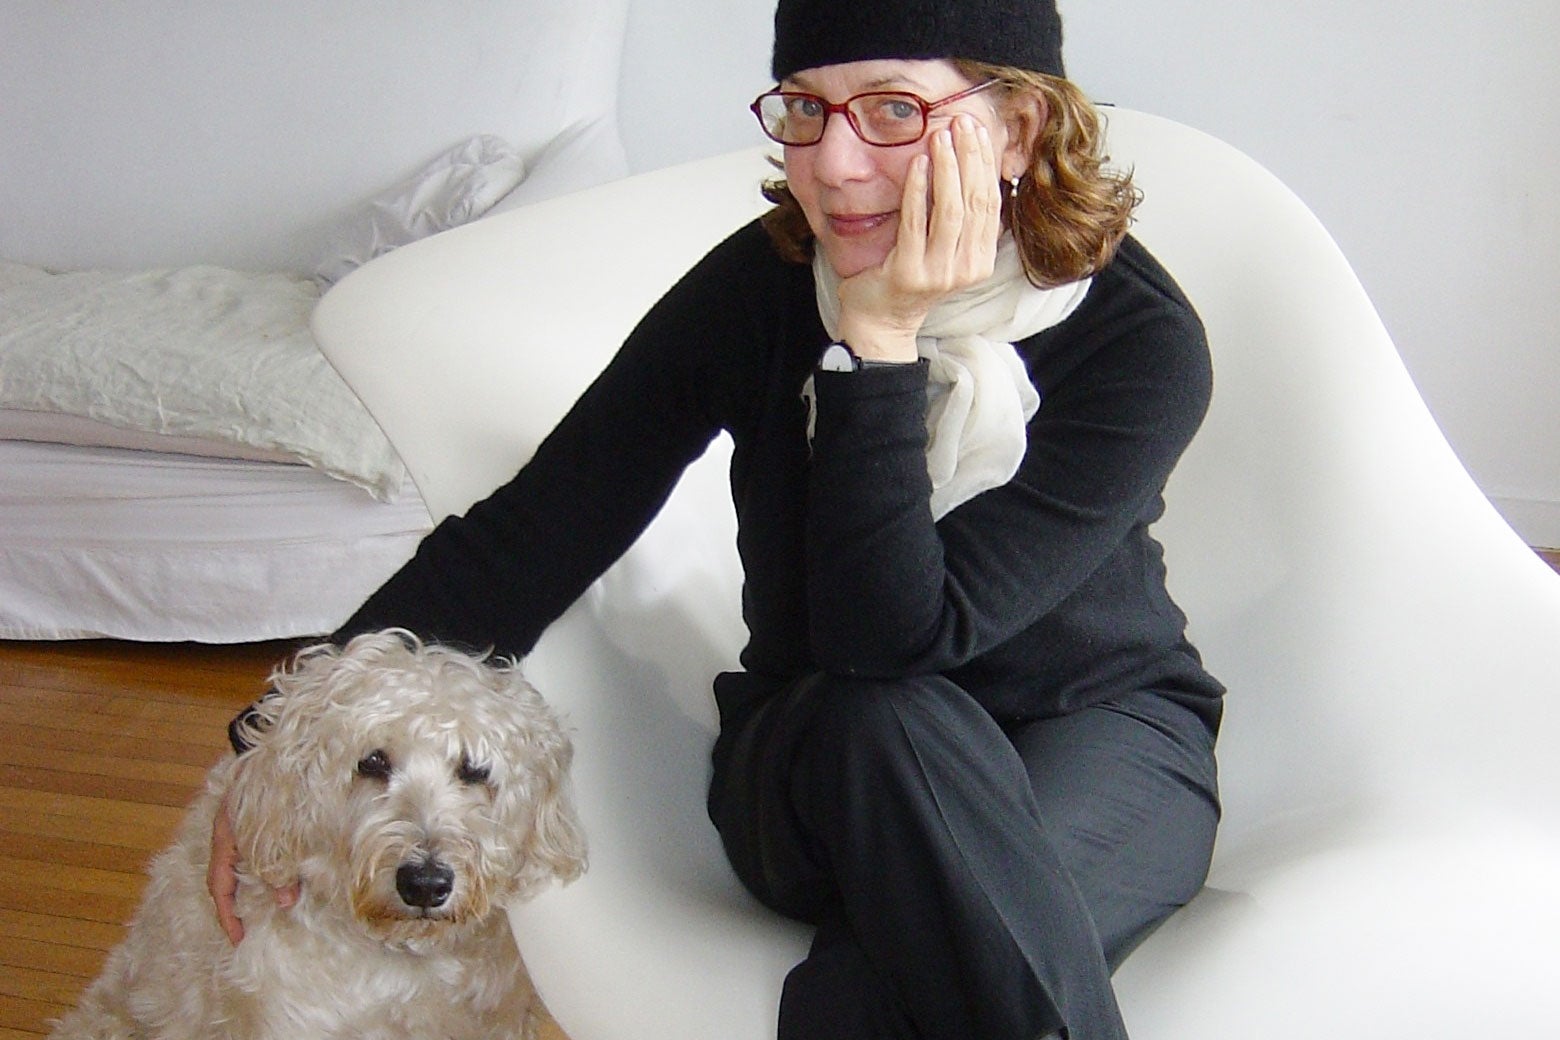 Maira Kalman sits on a white chair and puts her hand on her dog.